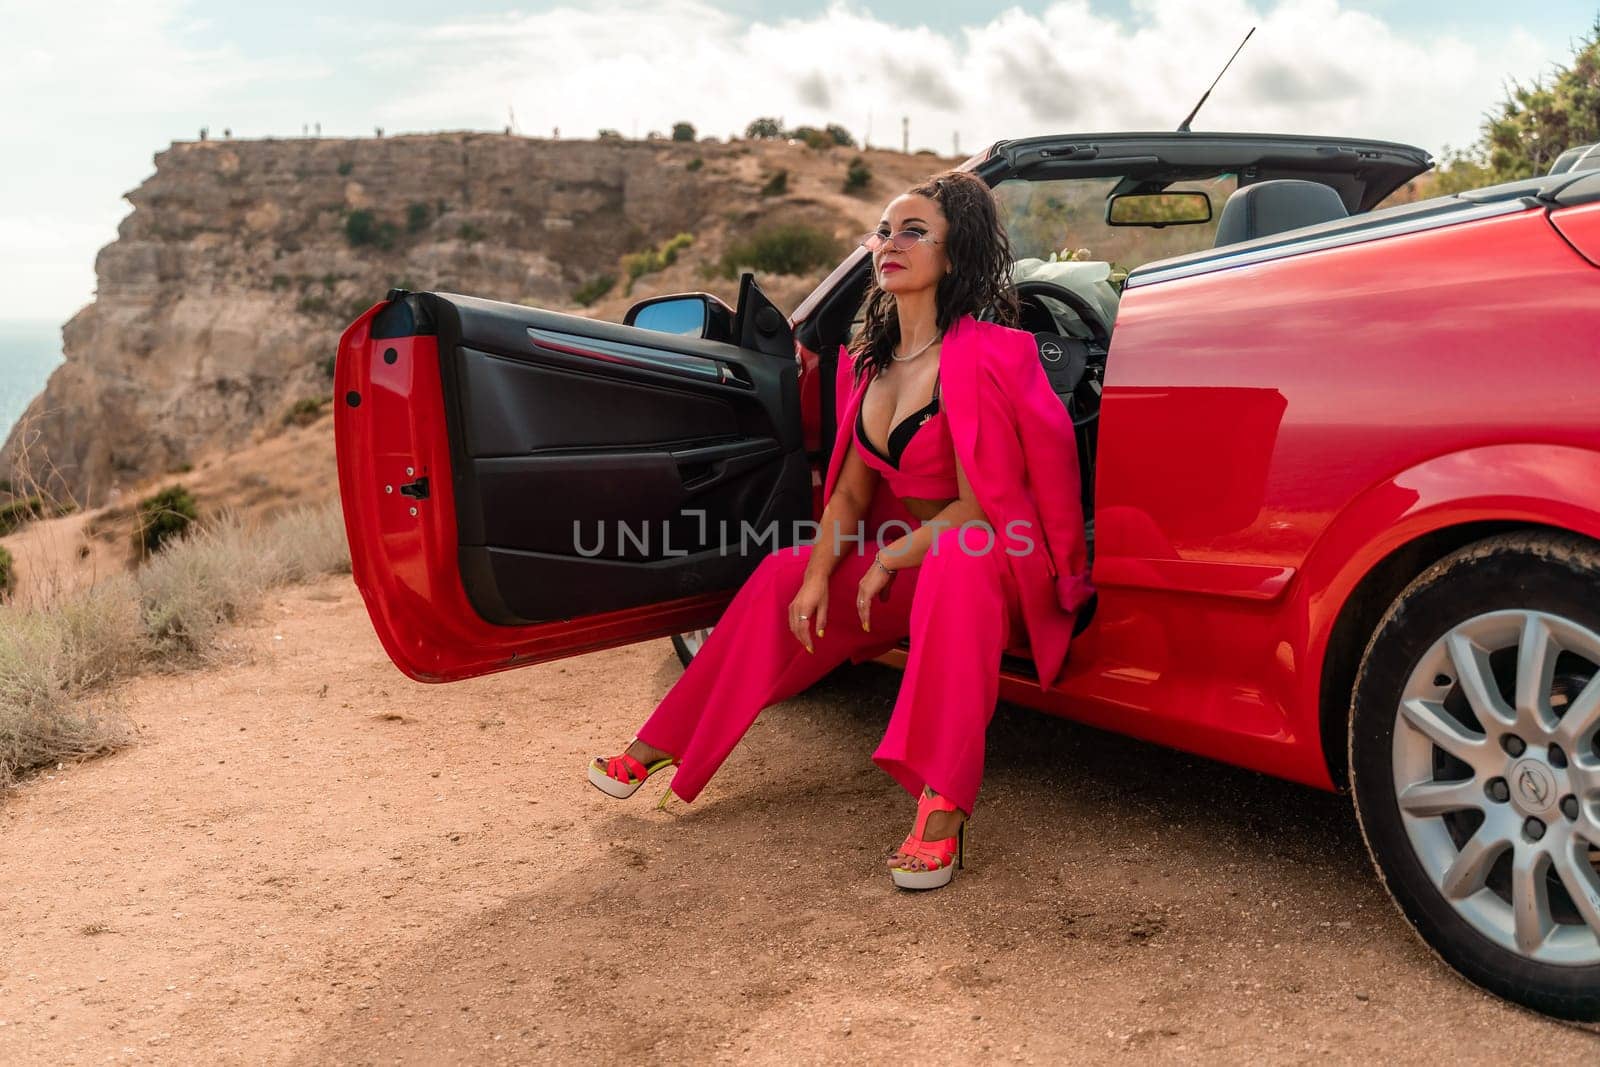 A woman in a pink suit sits in the open door of a red convertible. The scene is set on a rocky hillside overlooking the ocean. The woman is posing for a photo